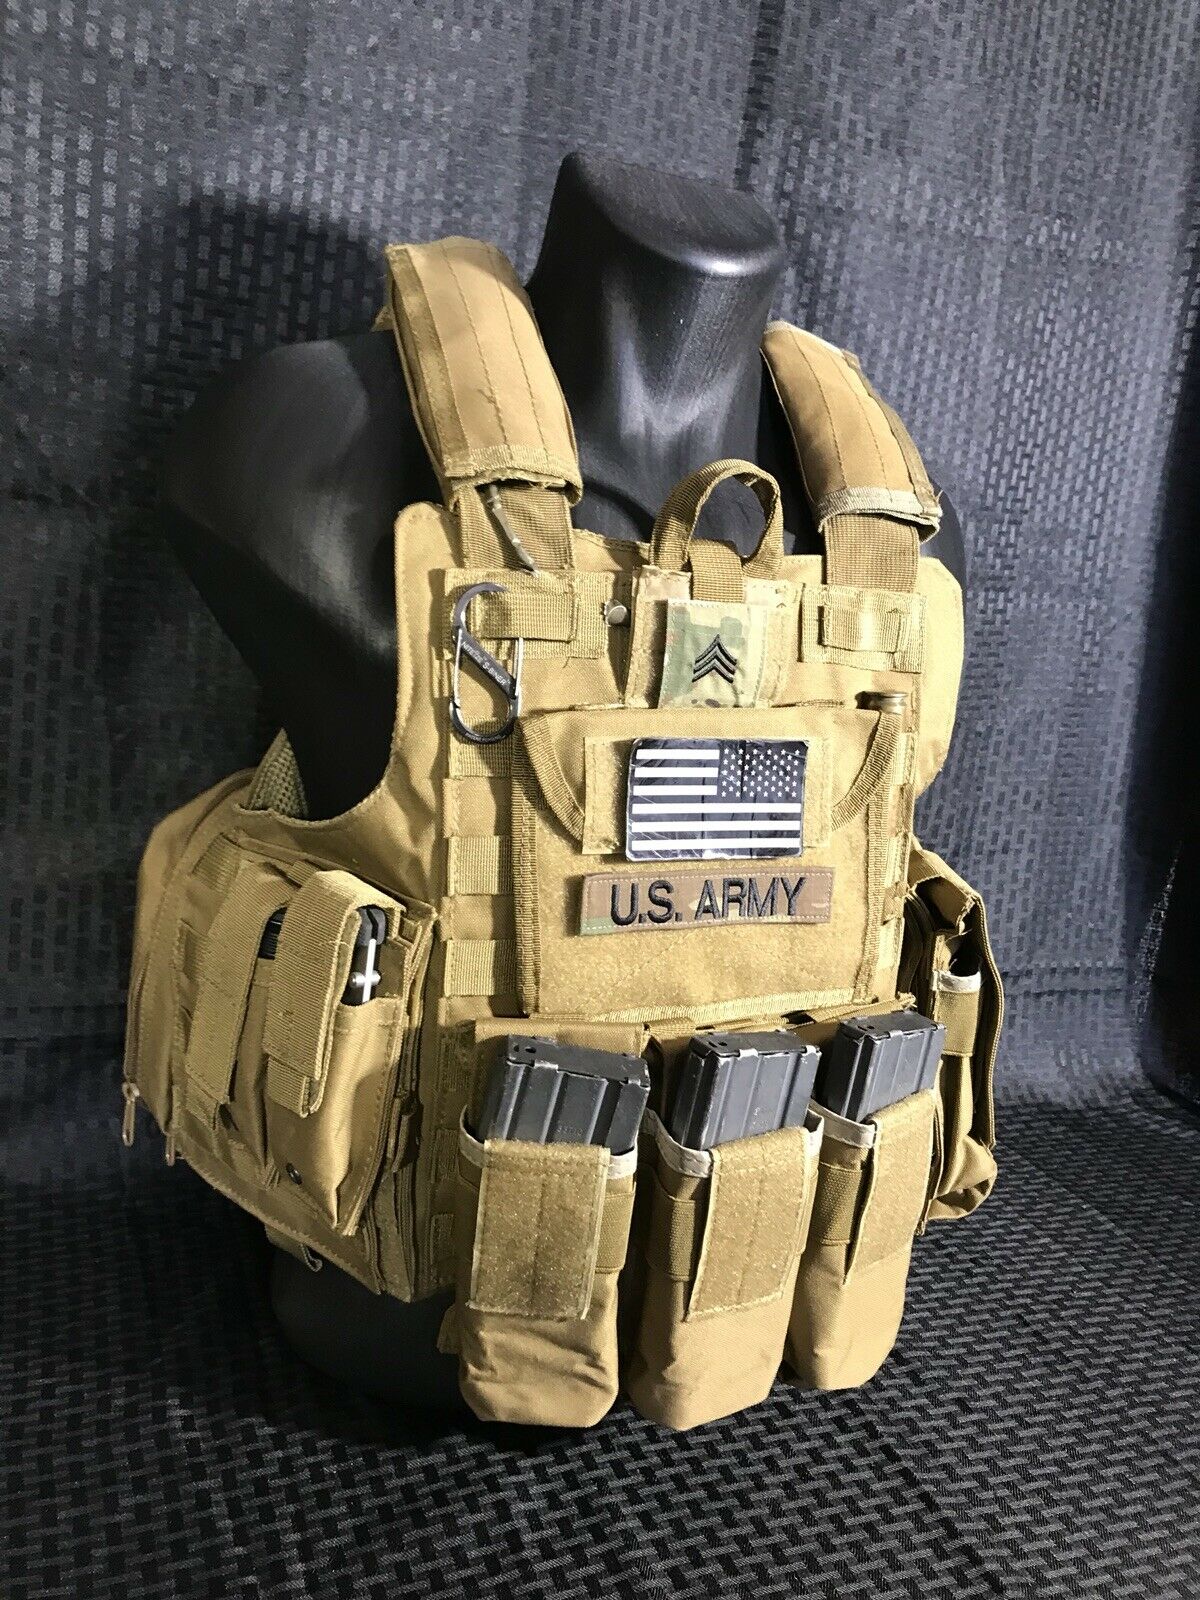 101 Inc. - Chest rig Operator Tactical Vest - Green - LQ14121 best price, check availability, buy online with